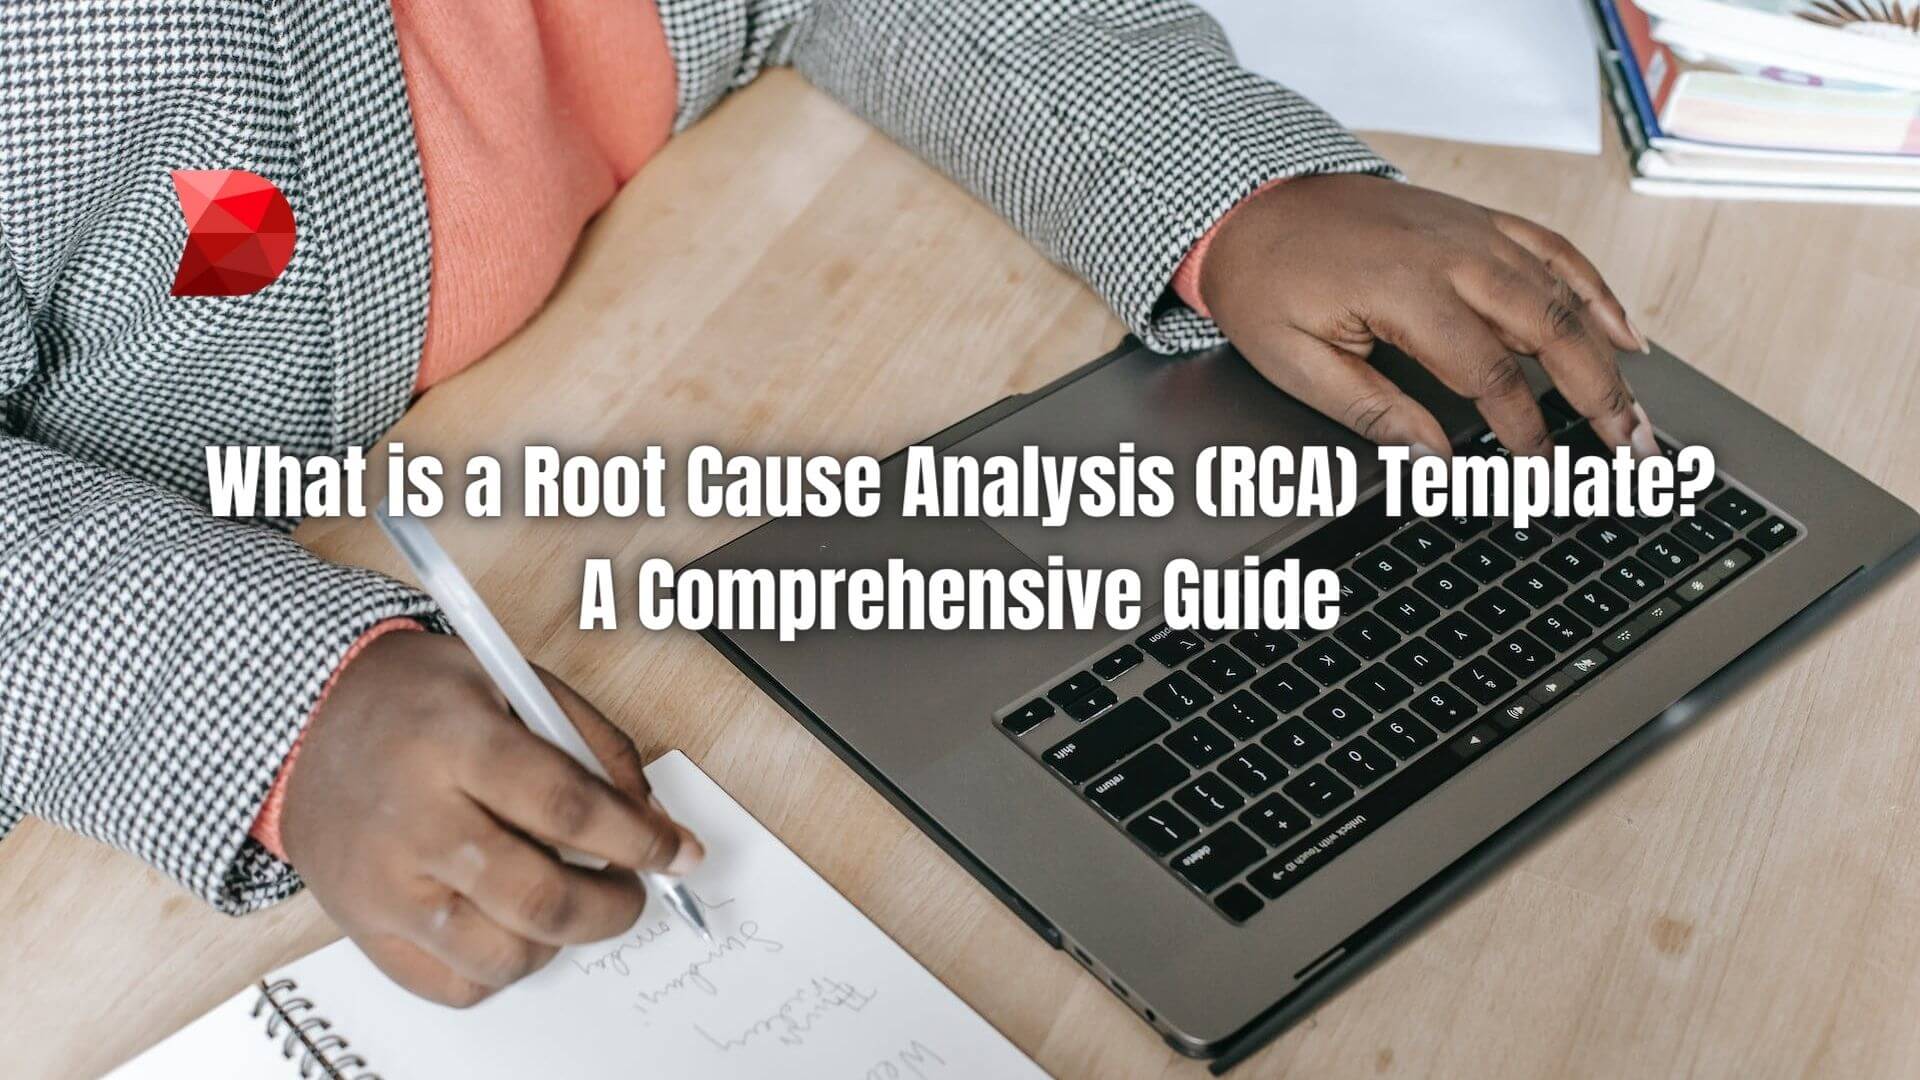 Uncover the secrets of effective RCA templates with our comprehensive guide. Click here to learn how to create impactful solutions with ease!